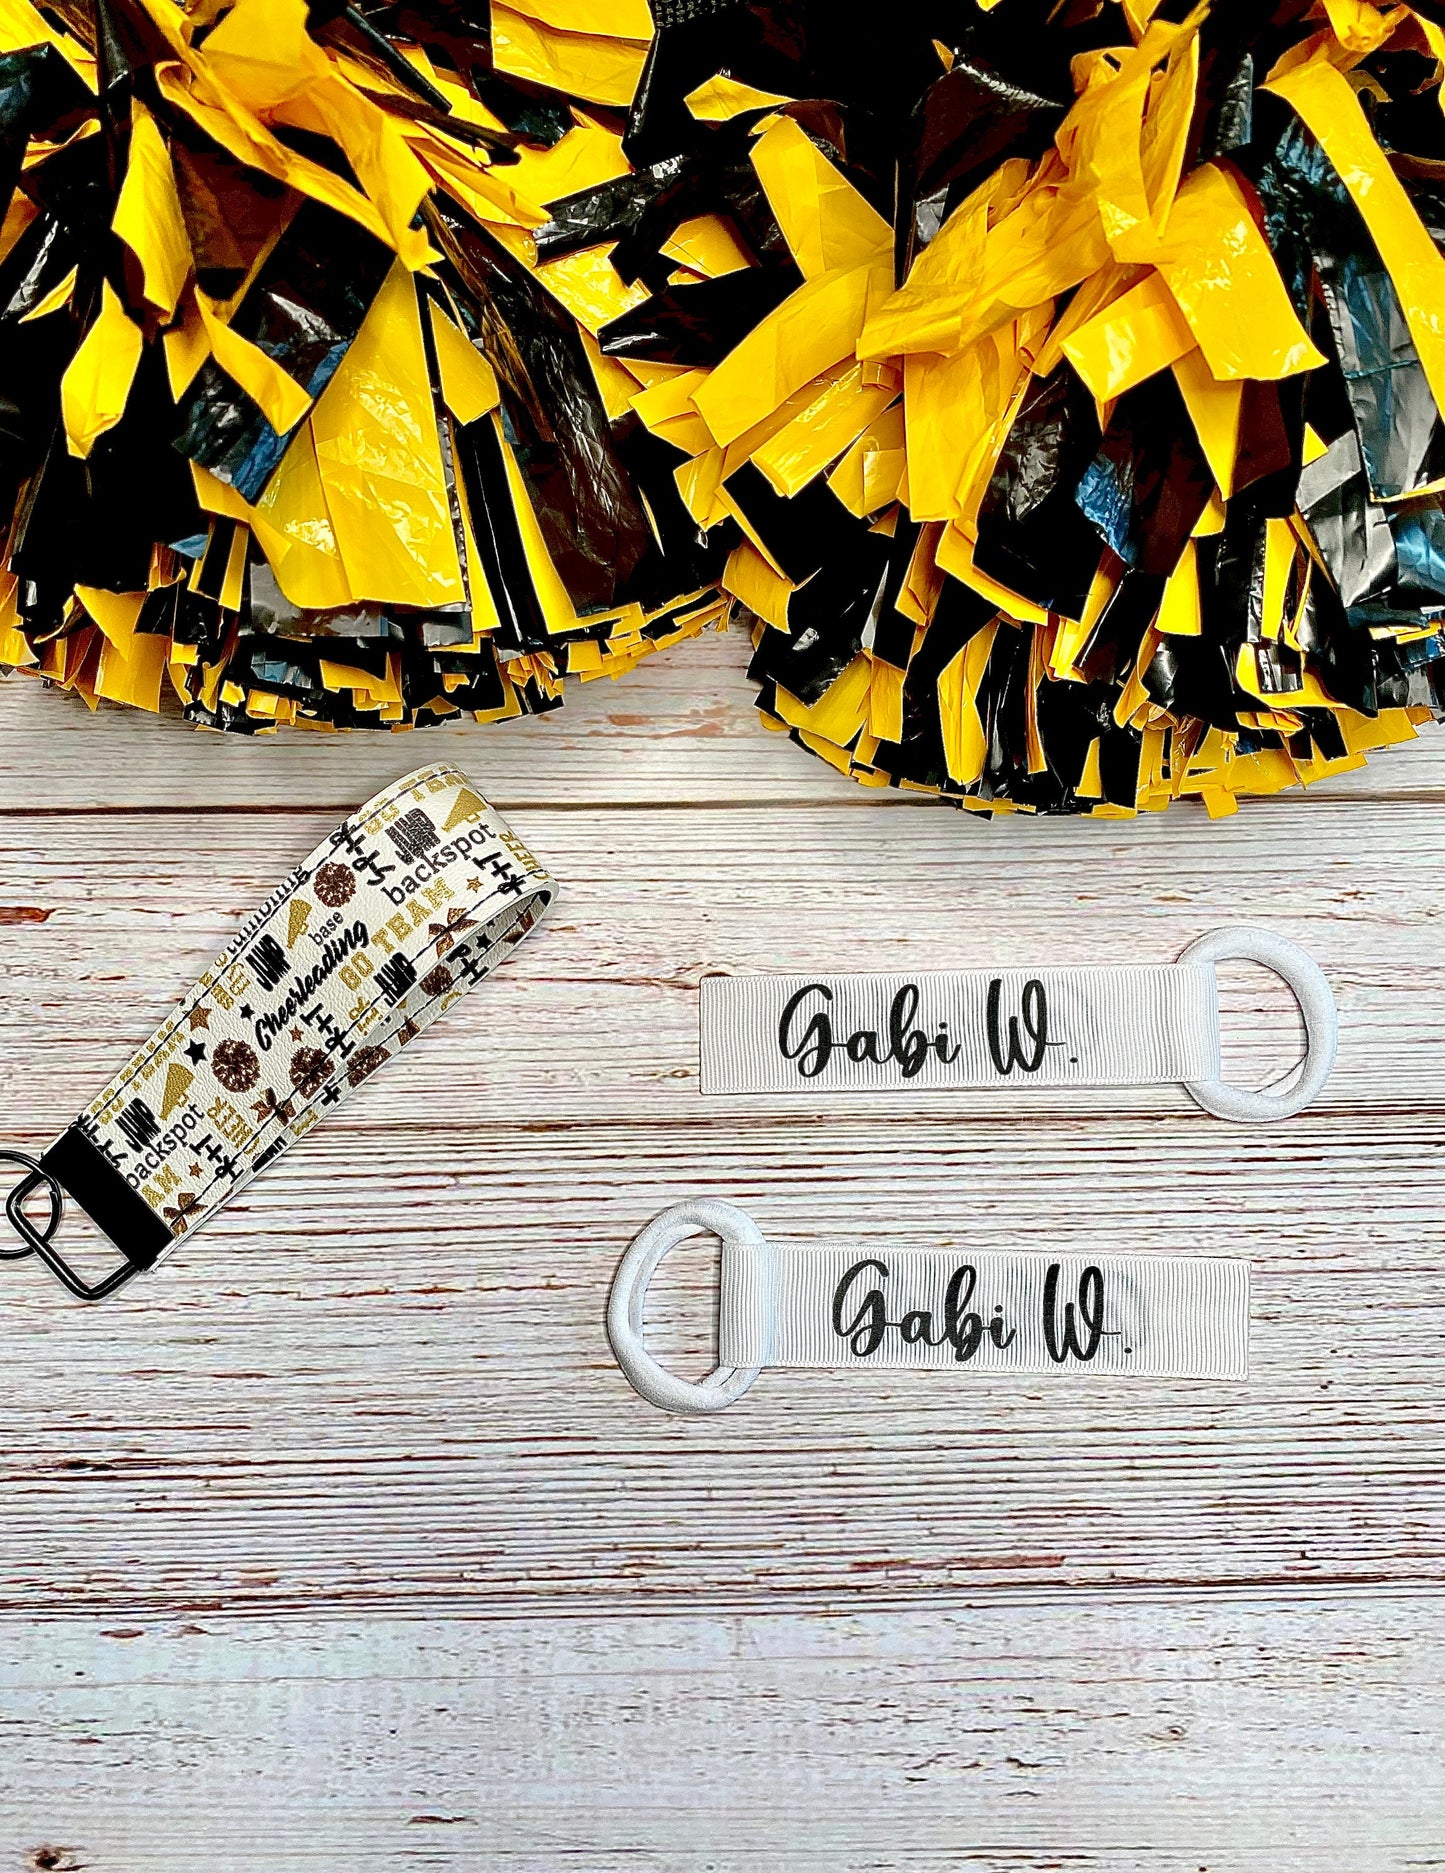 Personalized Cheer Pom Name Tag Labels, Cheerleading Team Gift, Custom School Colors Cheer Dance Pom Pom Tag, Cheer Accessories,